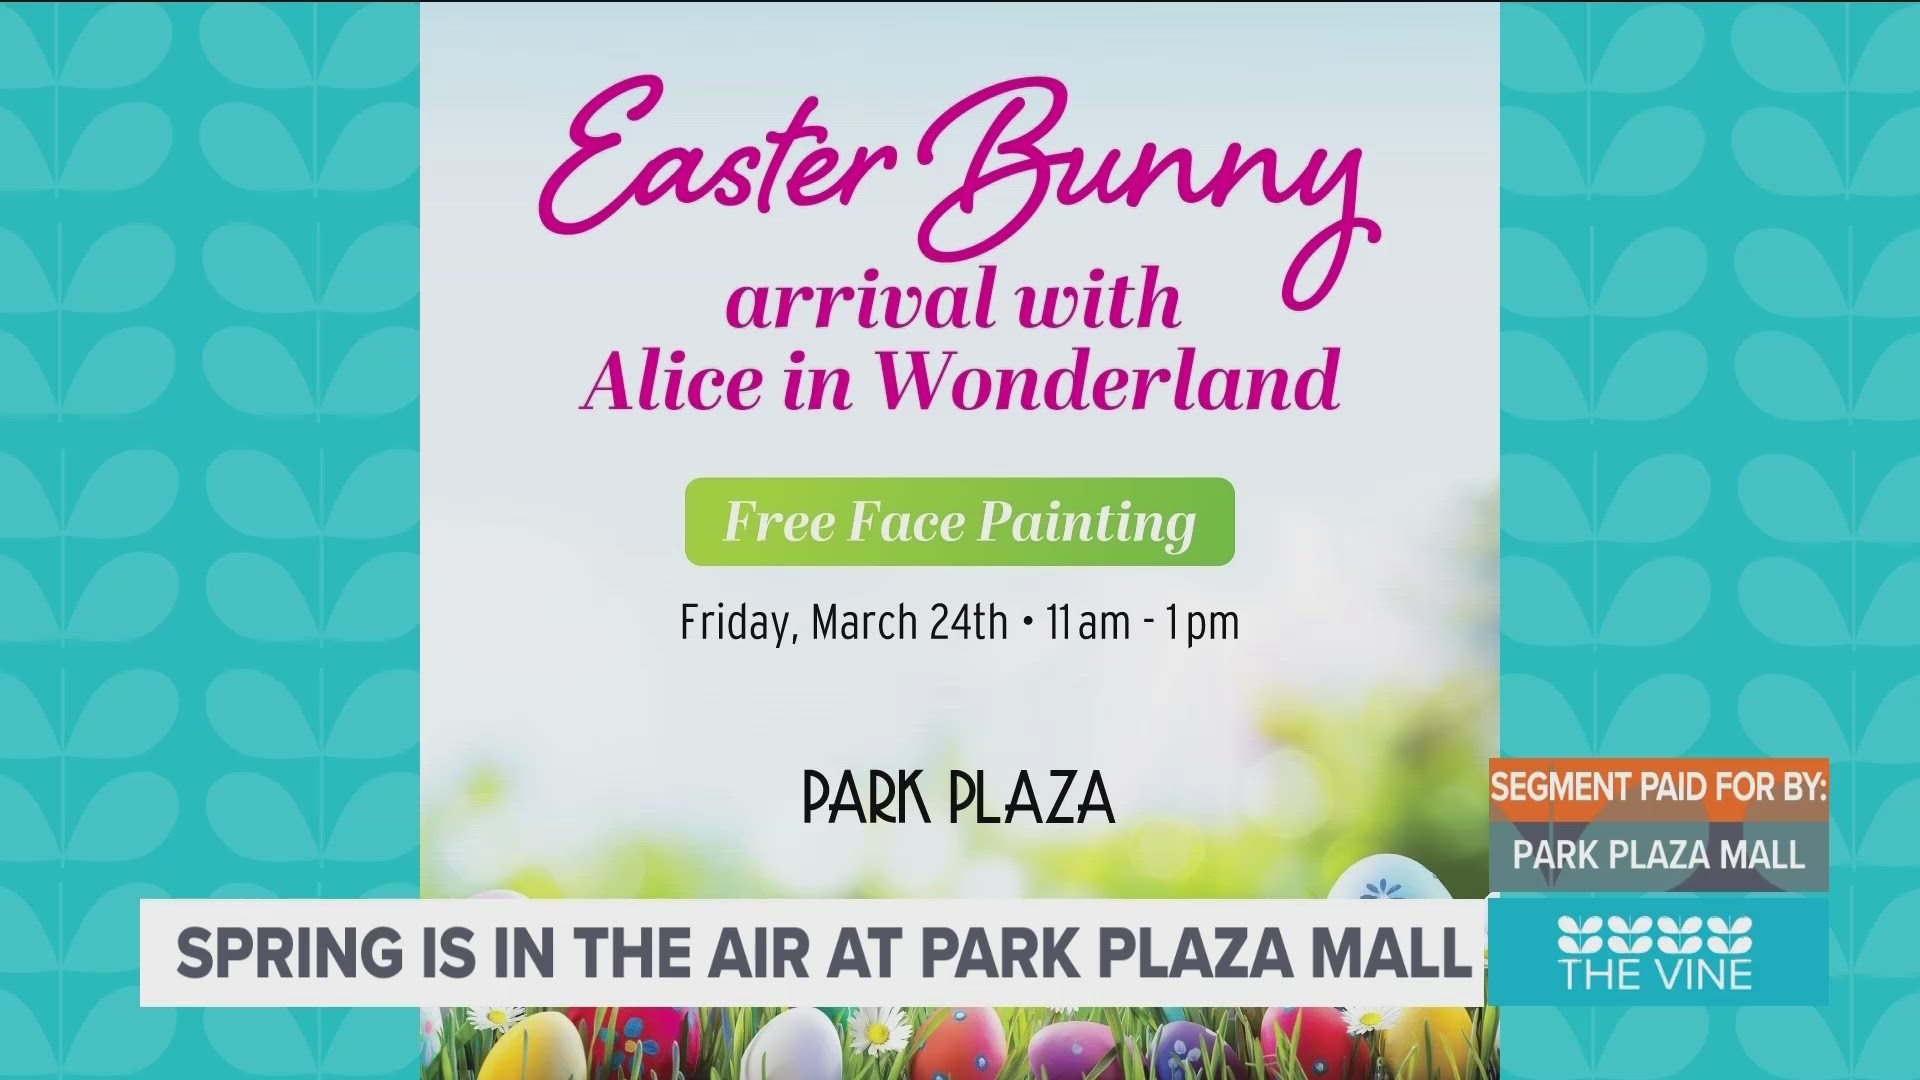 Learn more about Spring deals and more at parkplazamall.com.